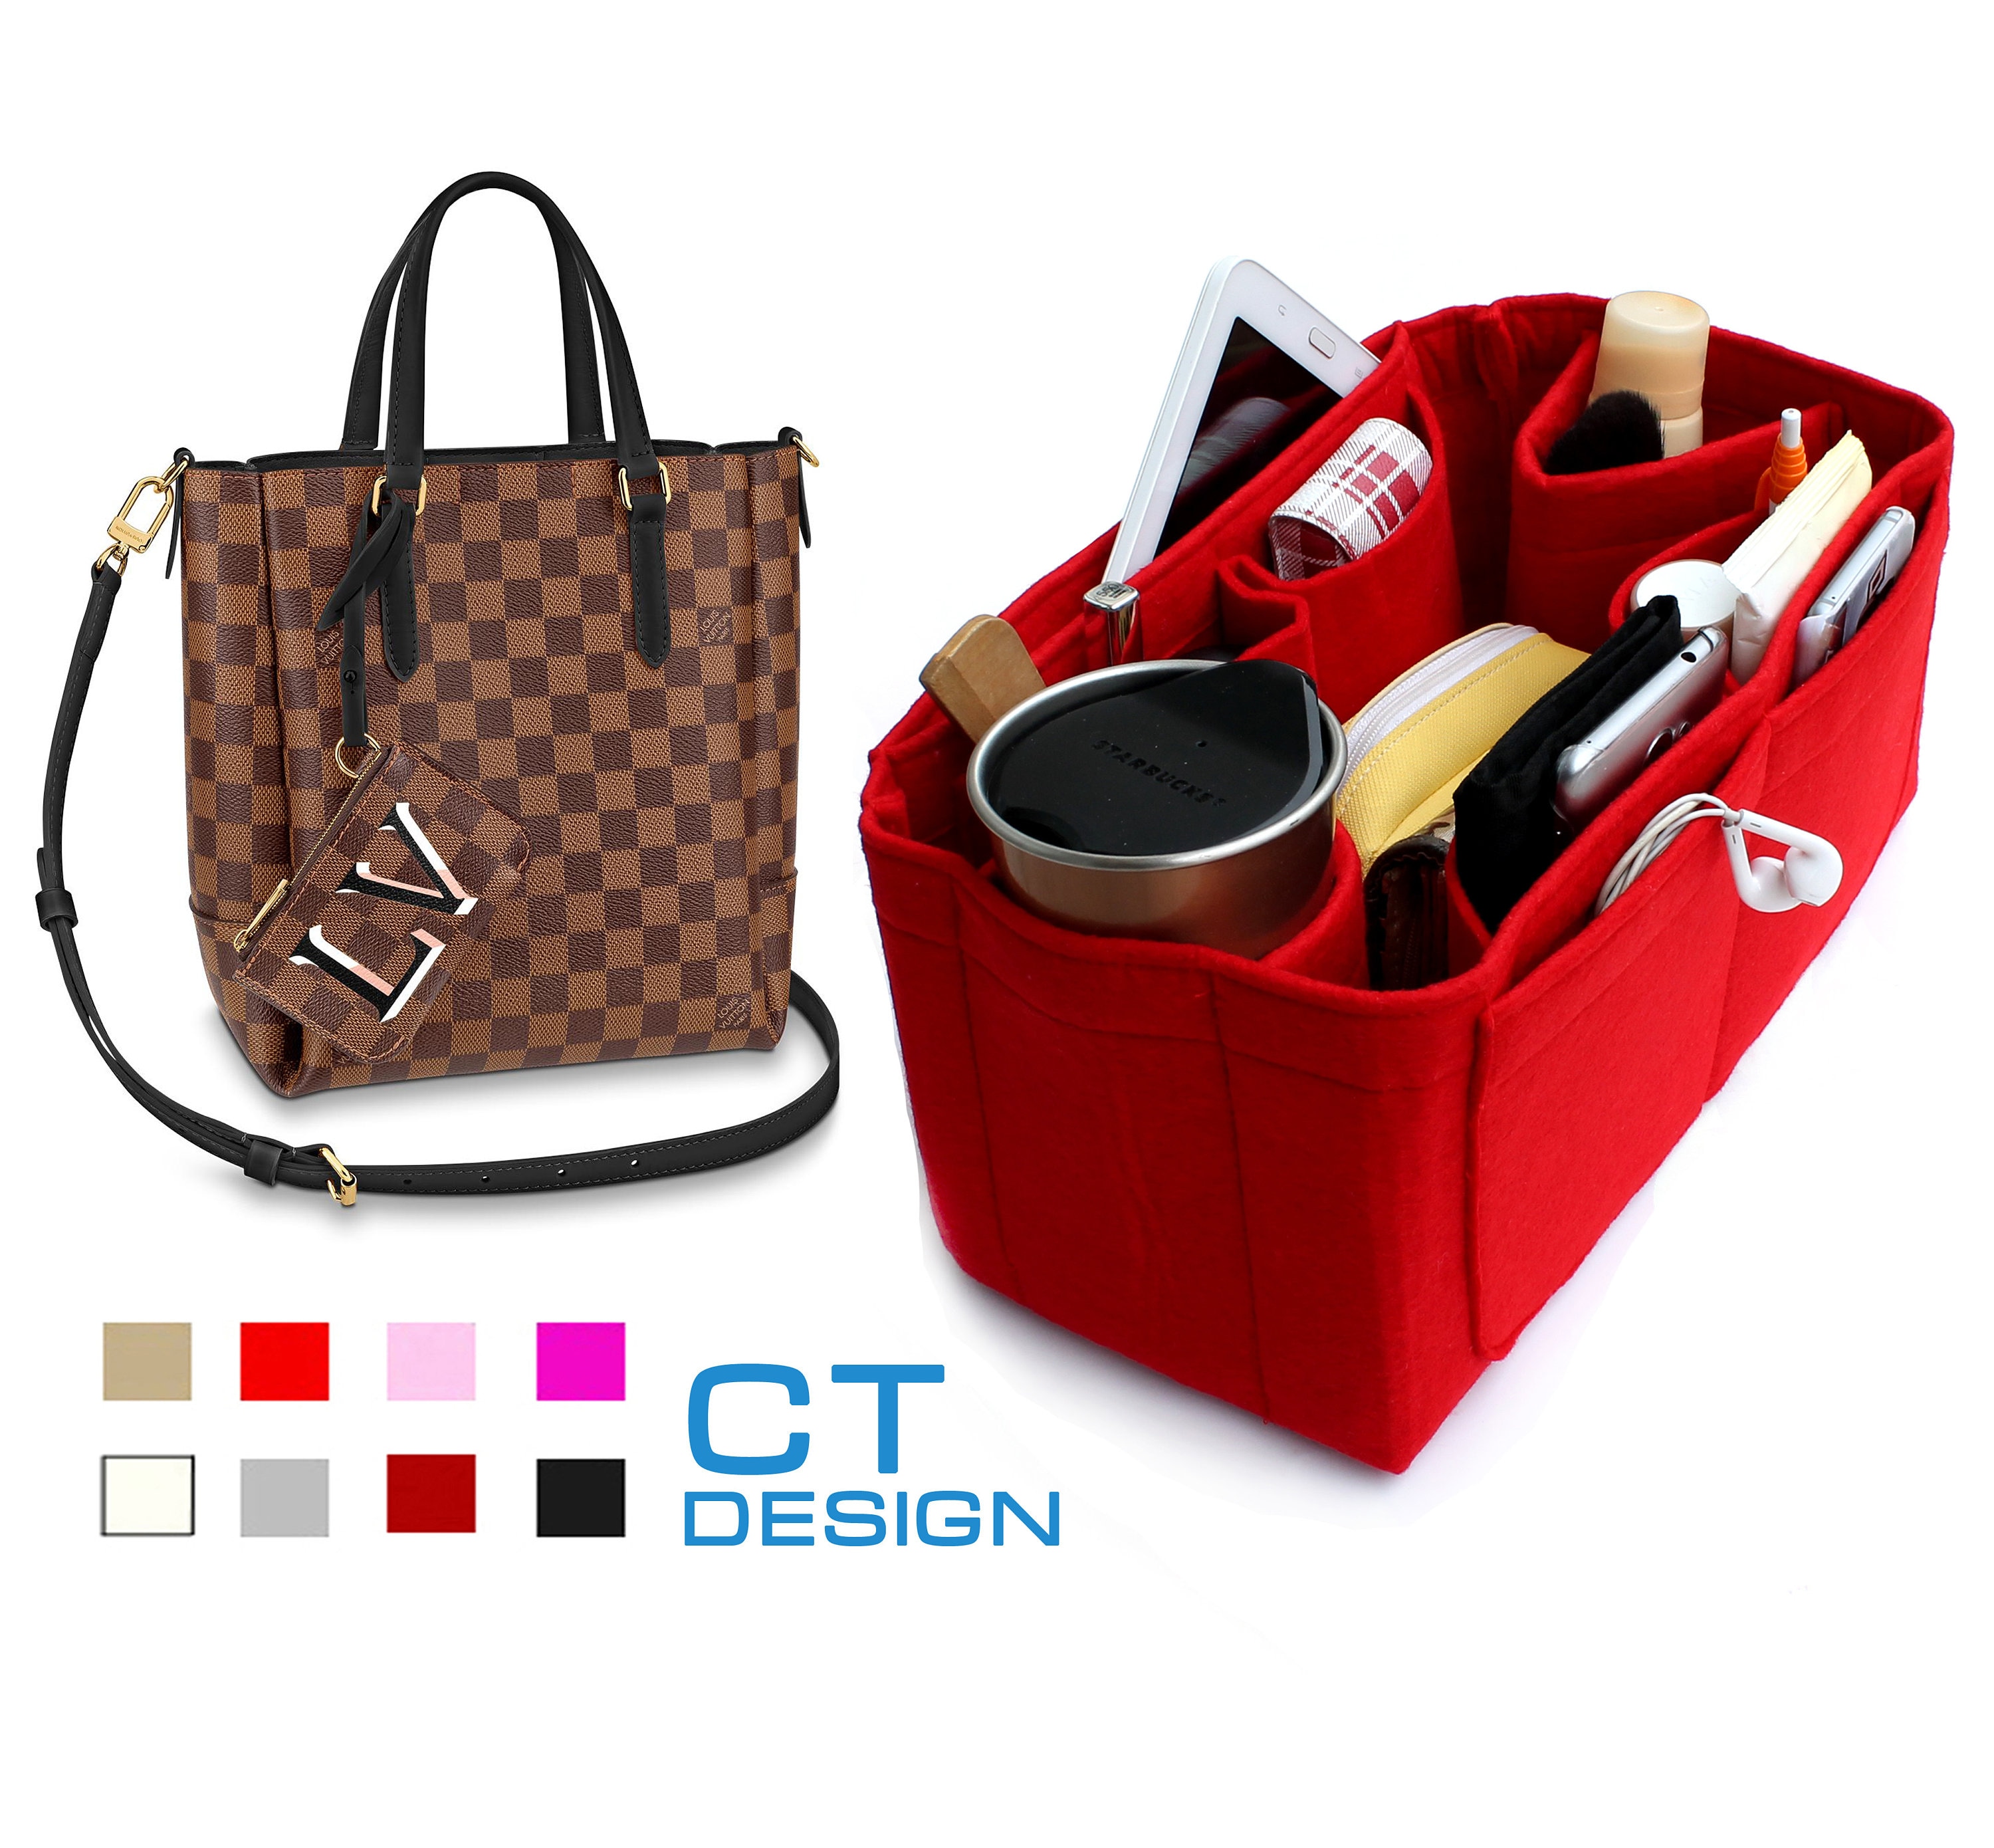 [Cabas Alto Organizer] Felt Purse Insert with Middle Zip Pouch, Customized  Tote Organize, Bag in Handbag (Style B)